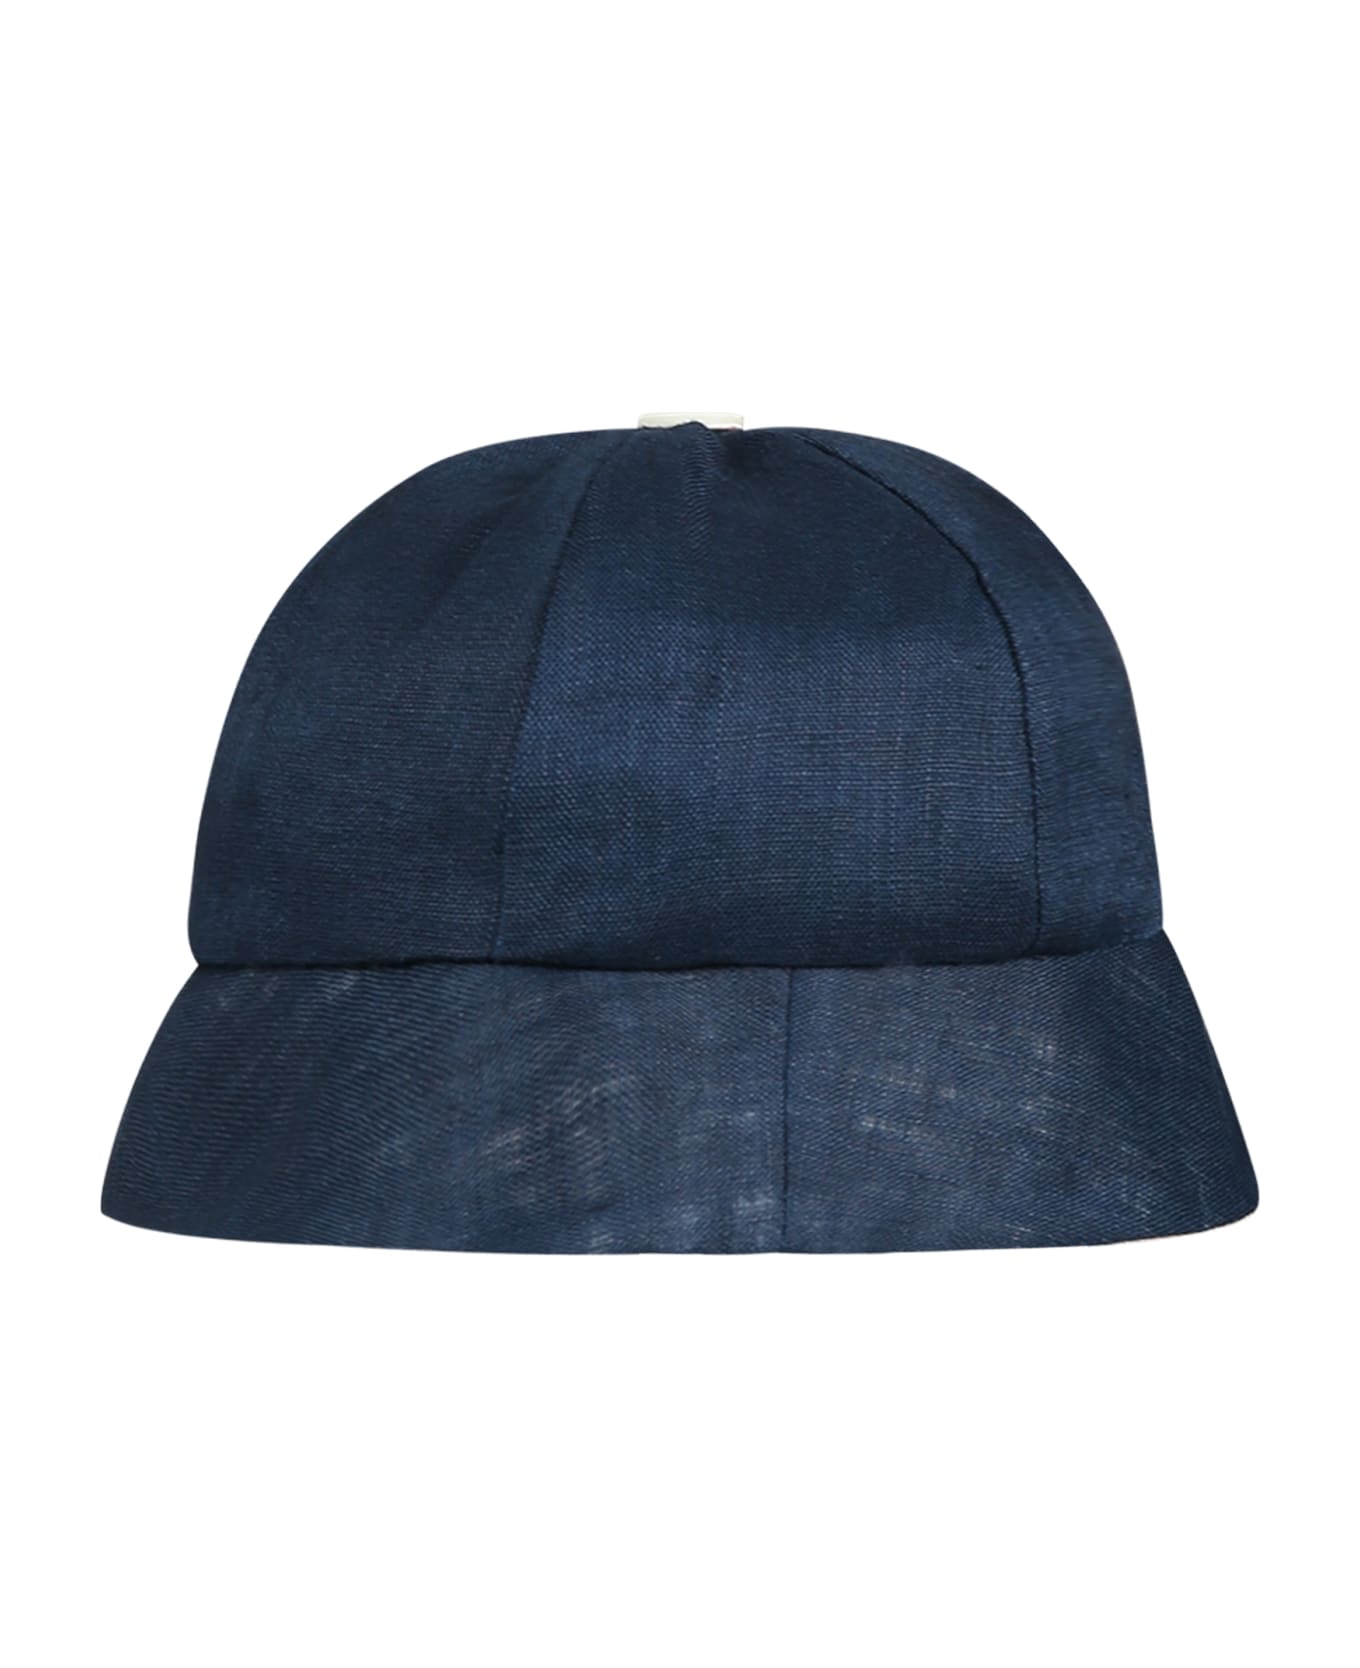 La stupenderia Blue Hat For Baby Boy - Blue アクセサリー＆ギフト